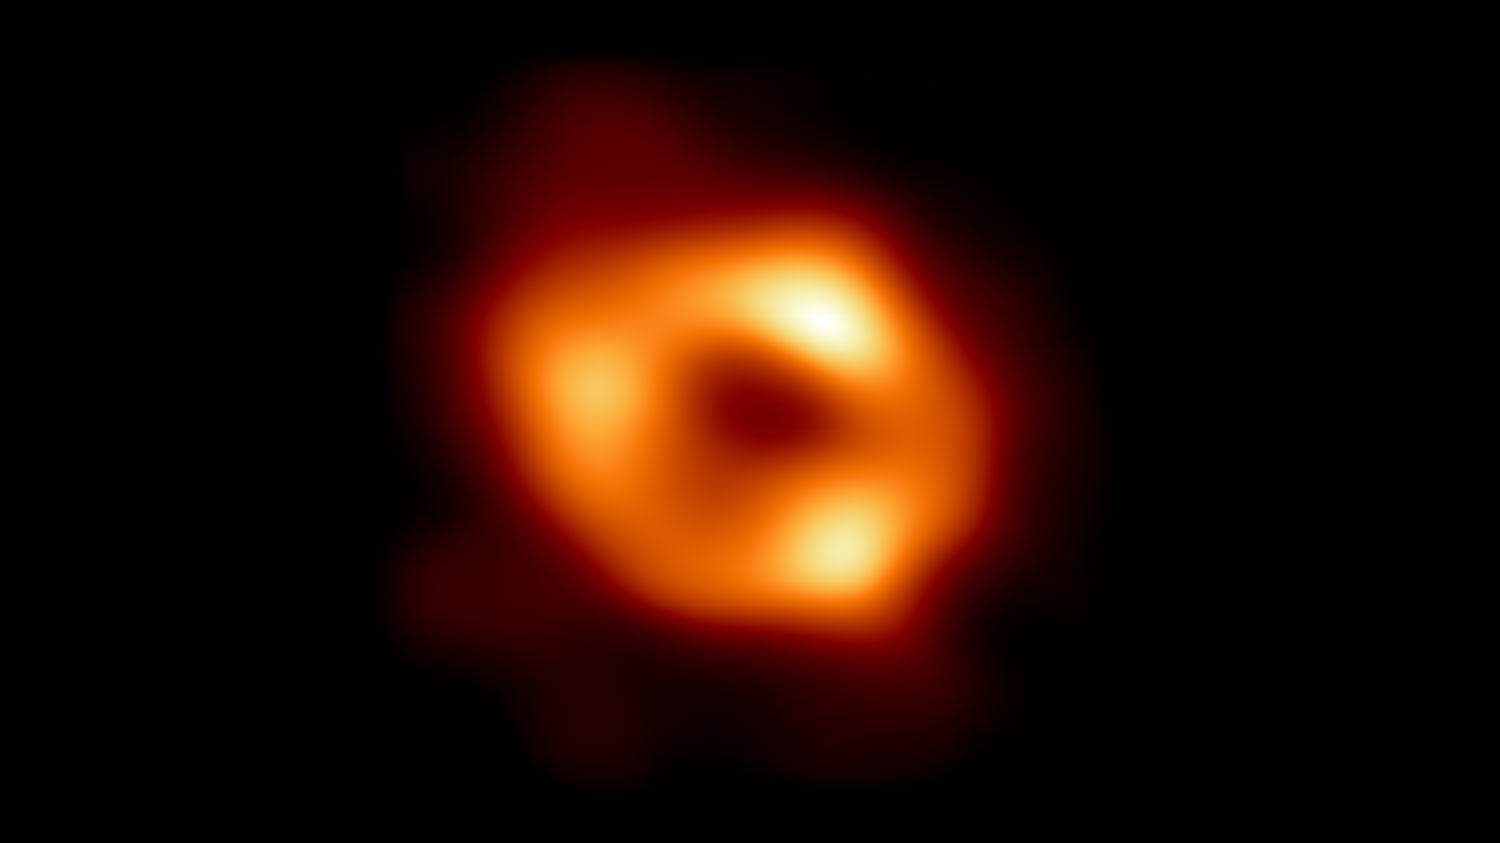 The orange glowing ring shows the event horizon of the Milky Way's supermassive black hole, Sagittarius A*. This is one of our best space shots.